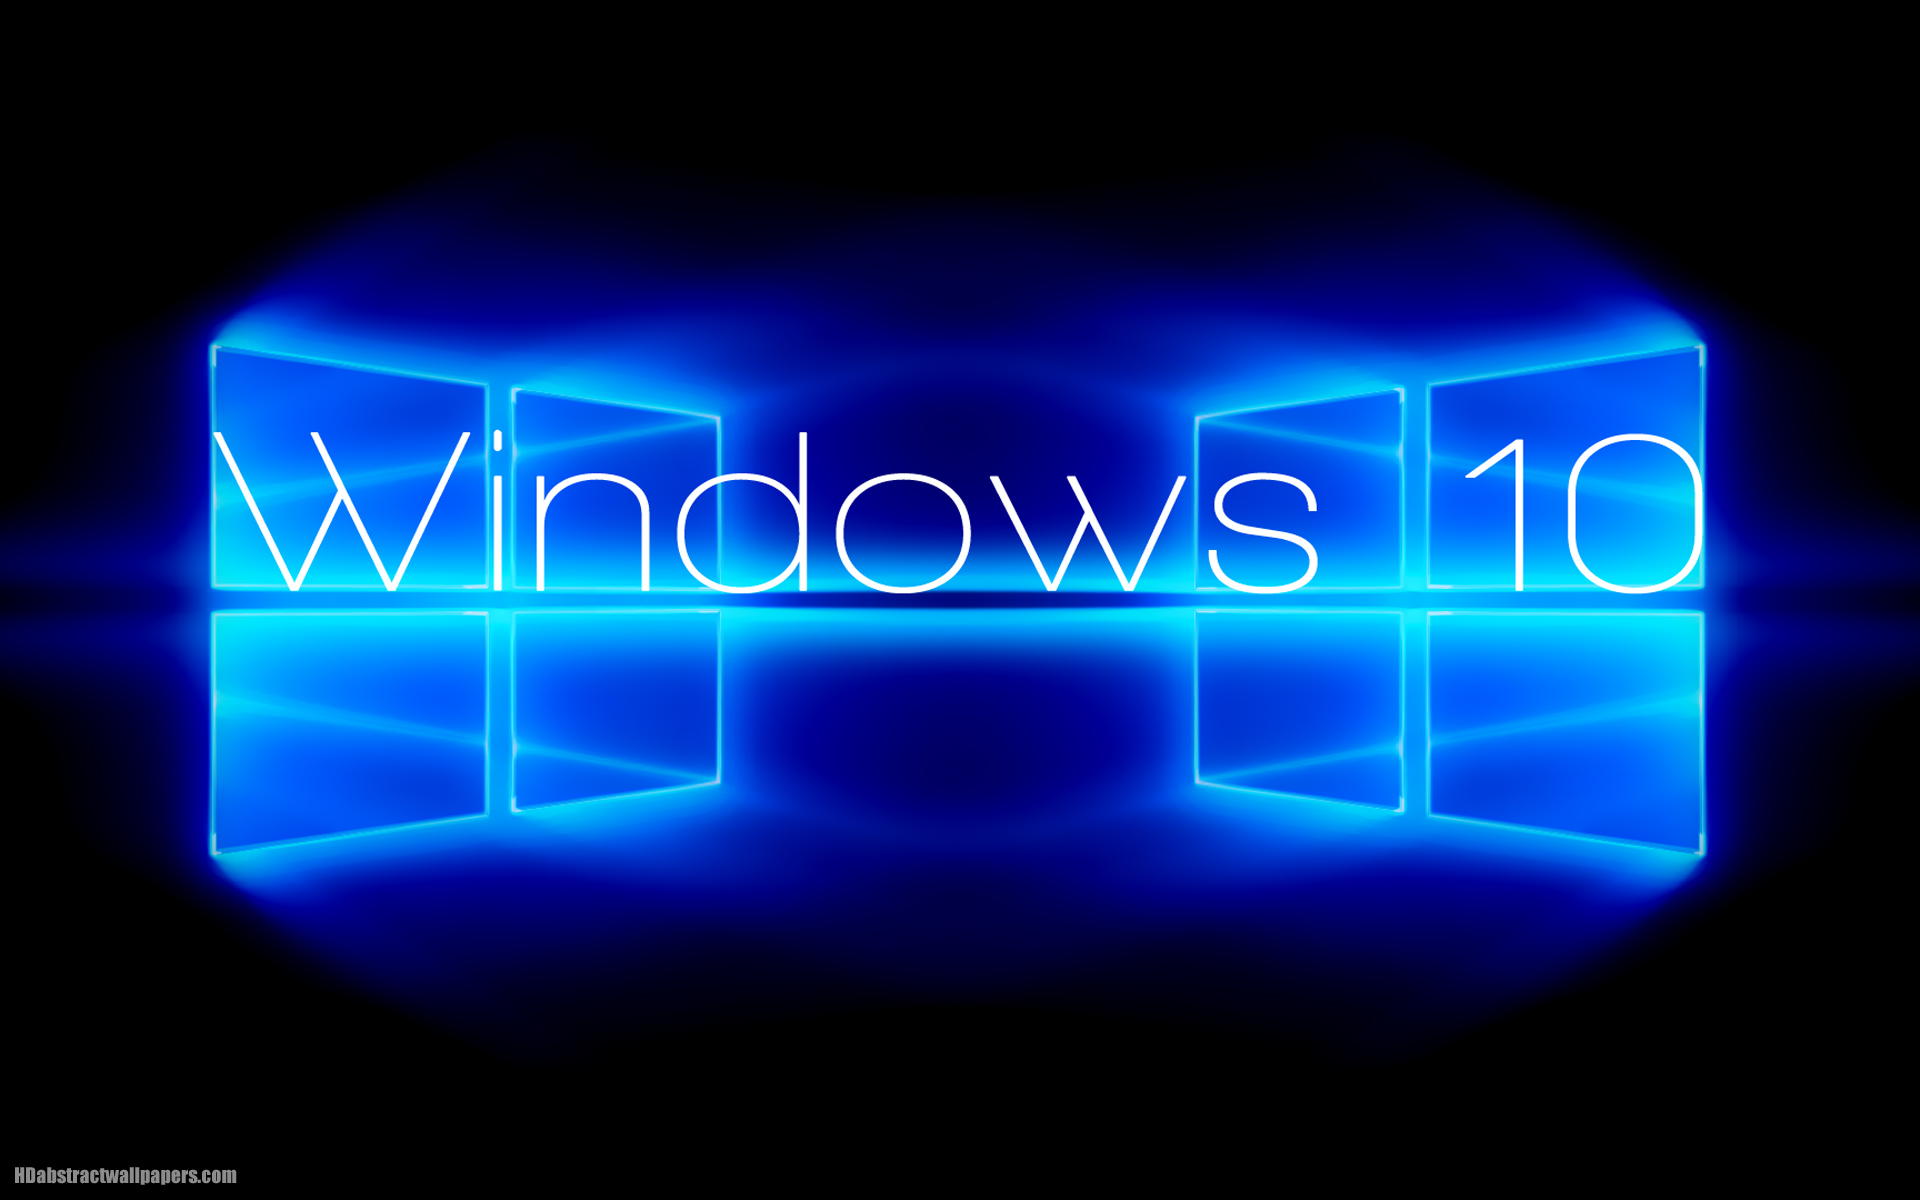 And Blue Windows Wallpaper With Logos Text